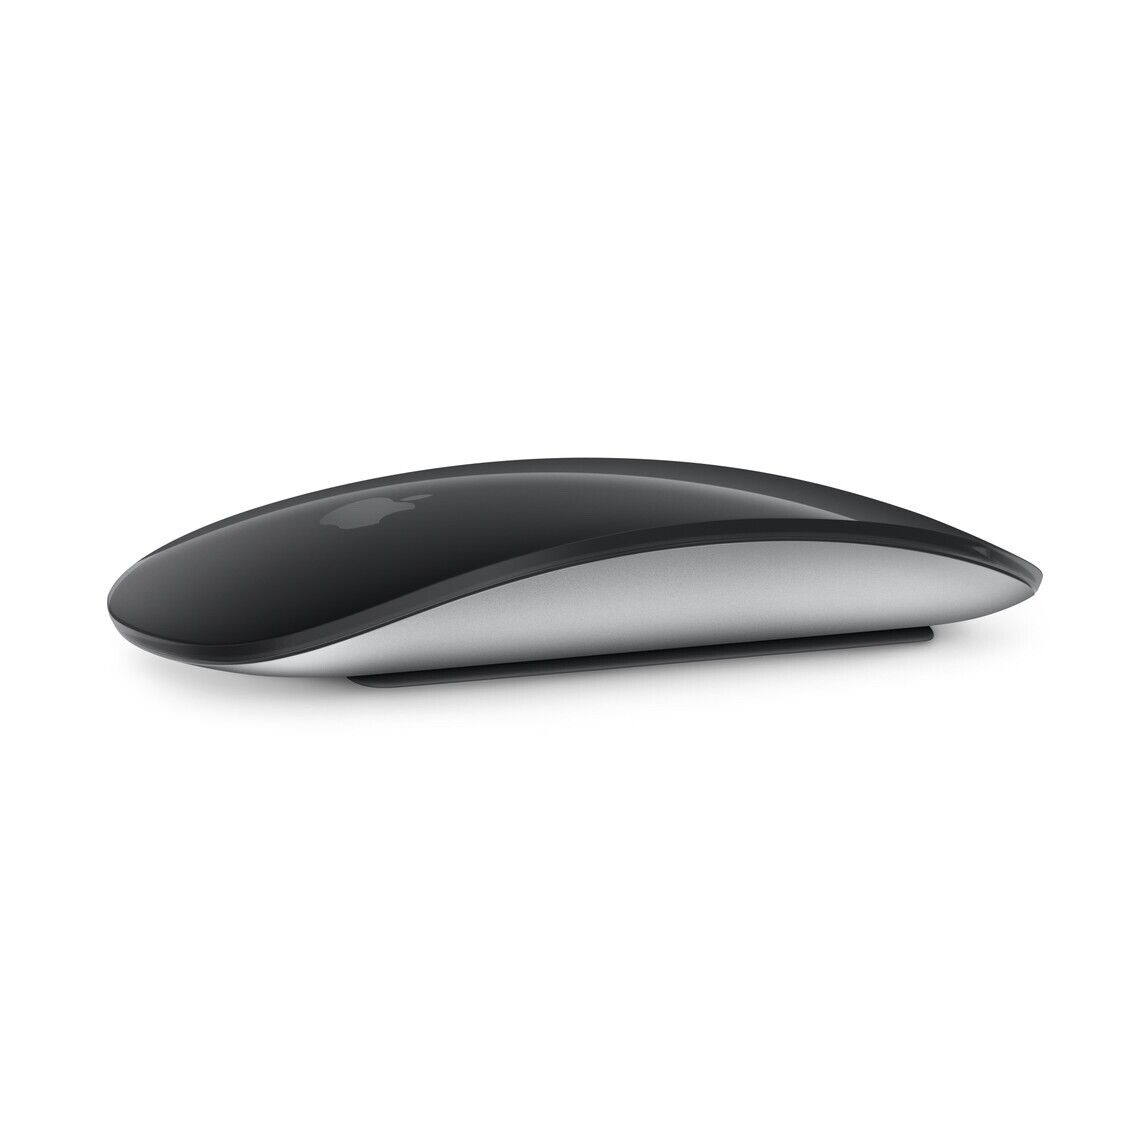 Brand New Sealed Genuine Apple Magic Mouse - Black Multi-Touch Surface MMMQ3AM/A